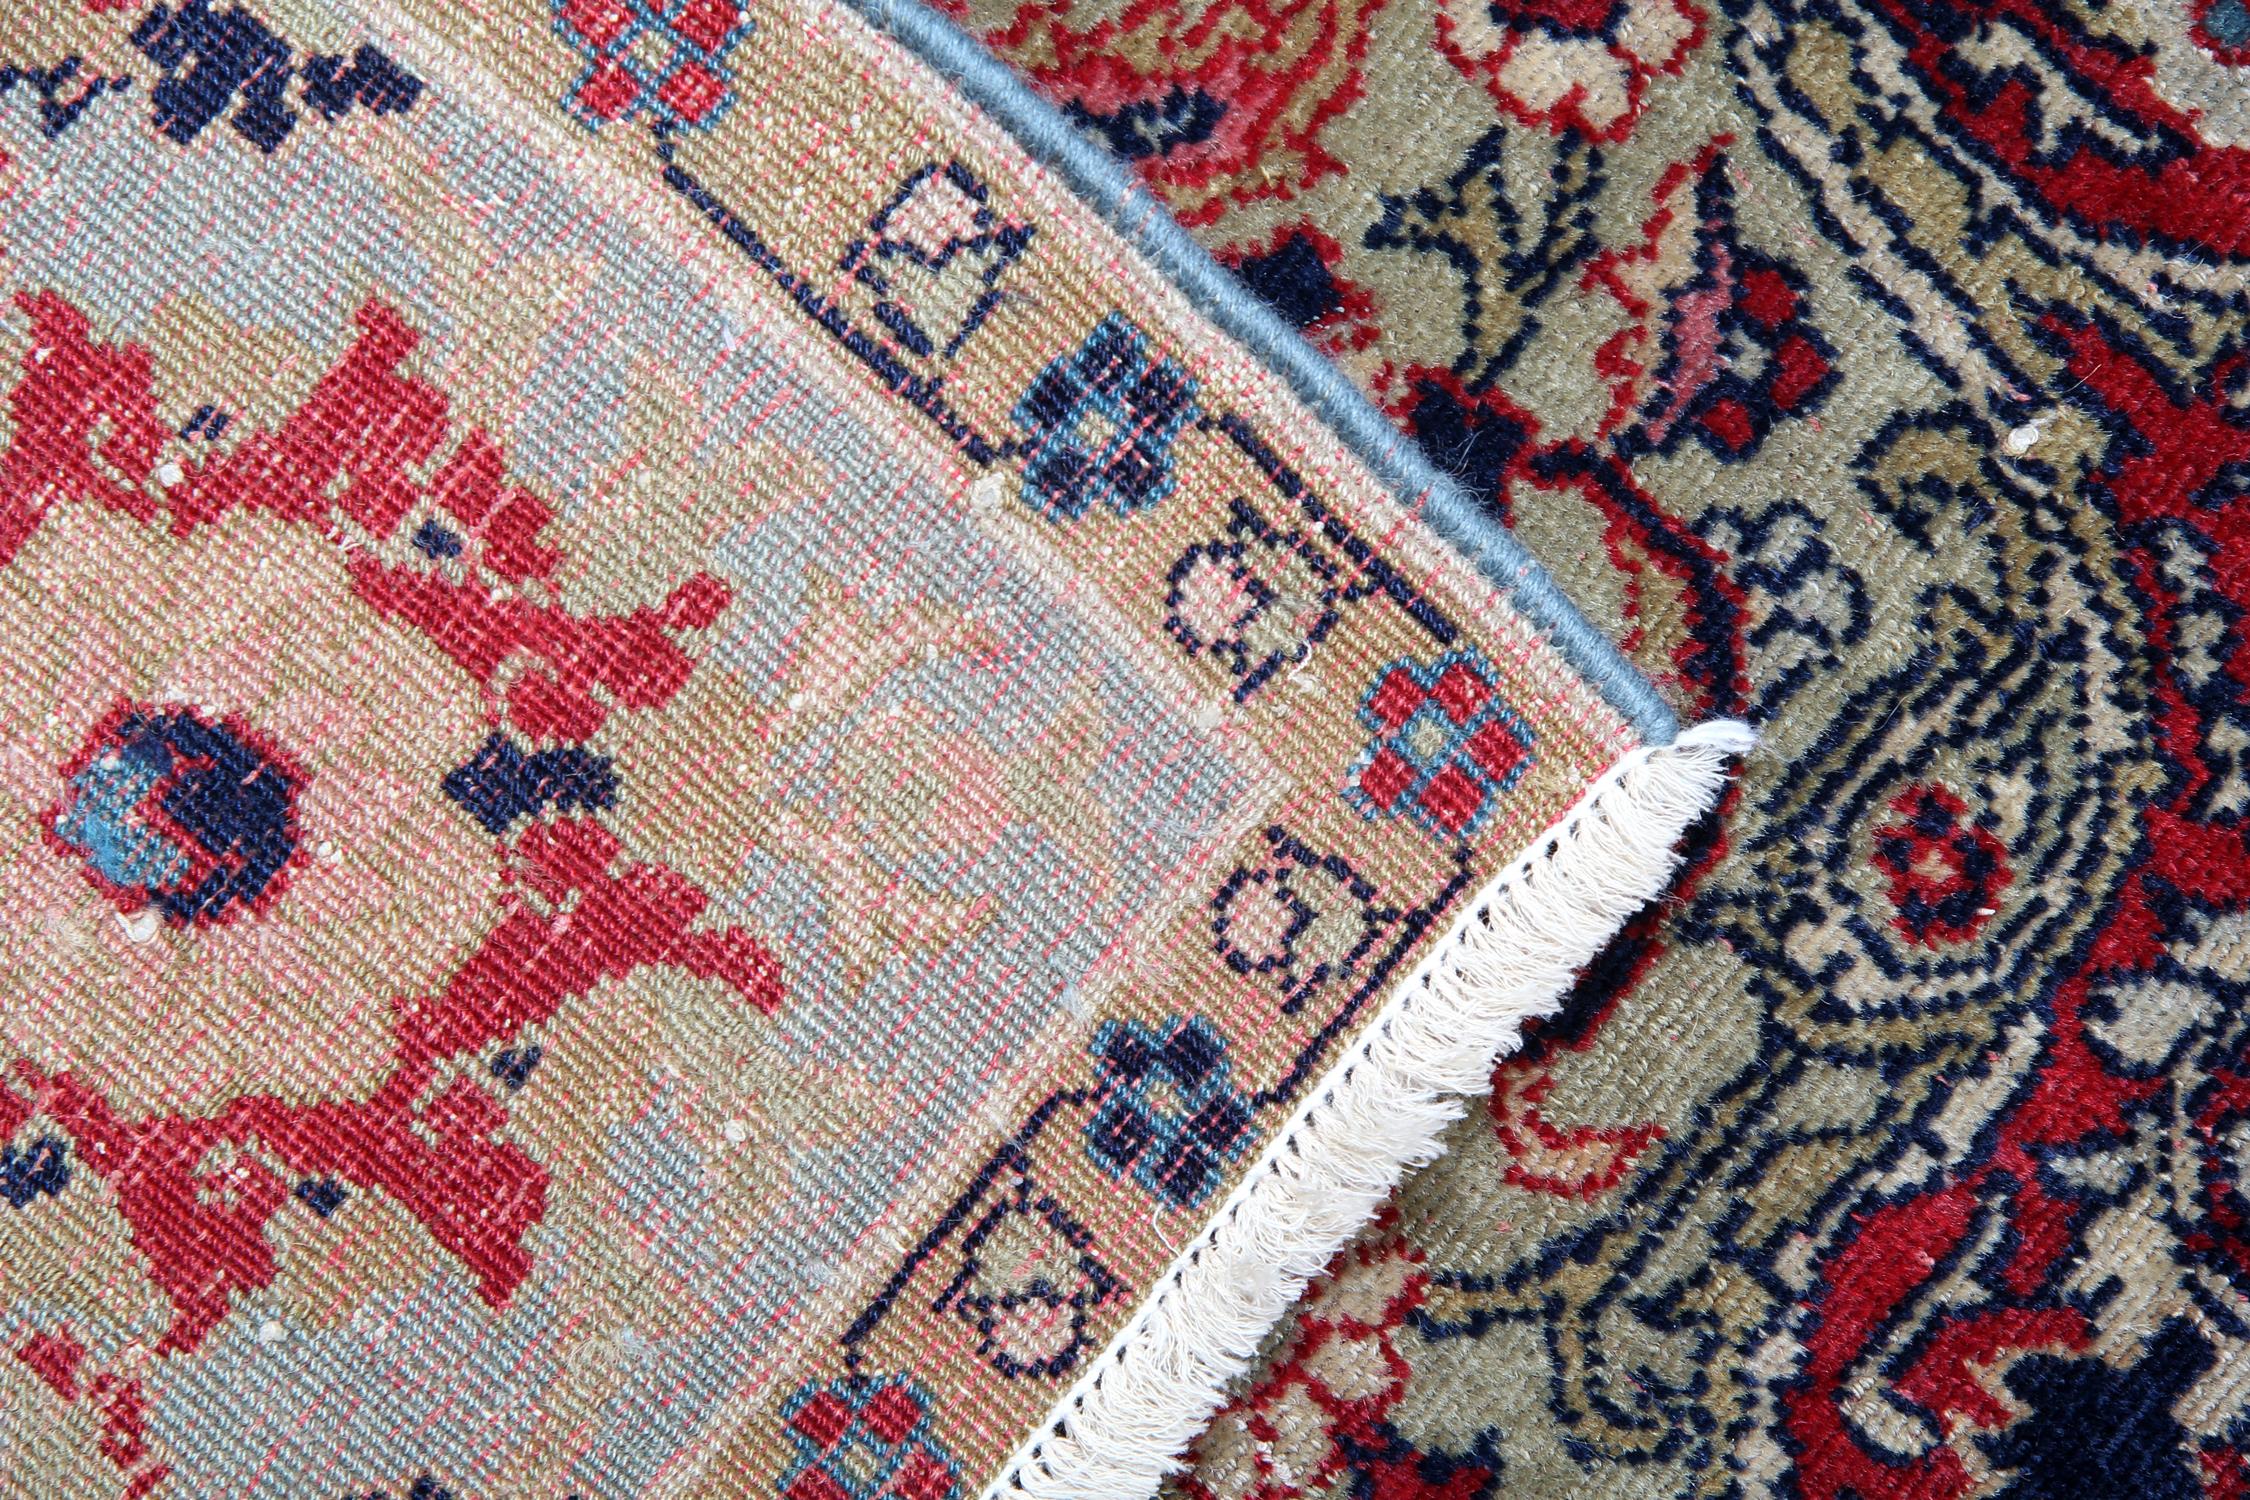 Vegetable Dyed Handmade Carpet Antique Rugs, Agra Indian Rug, Red Oriental Rugs for Sale For Sale